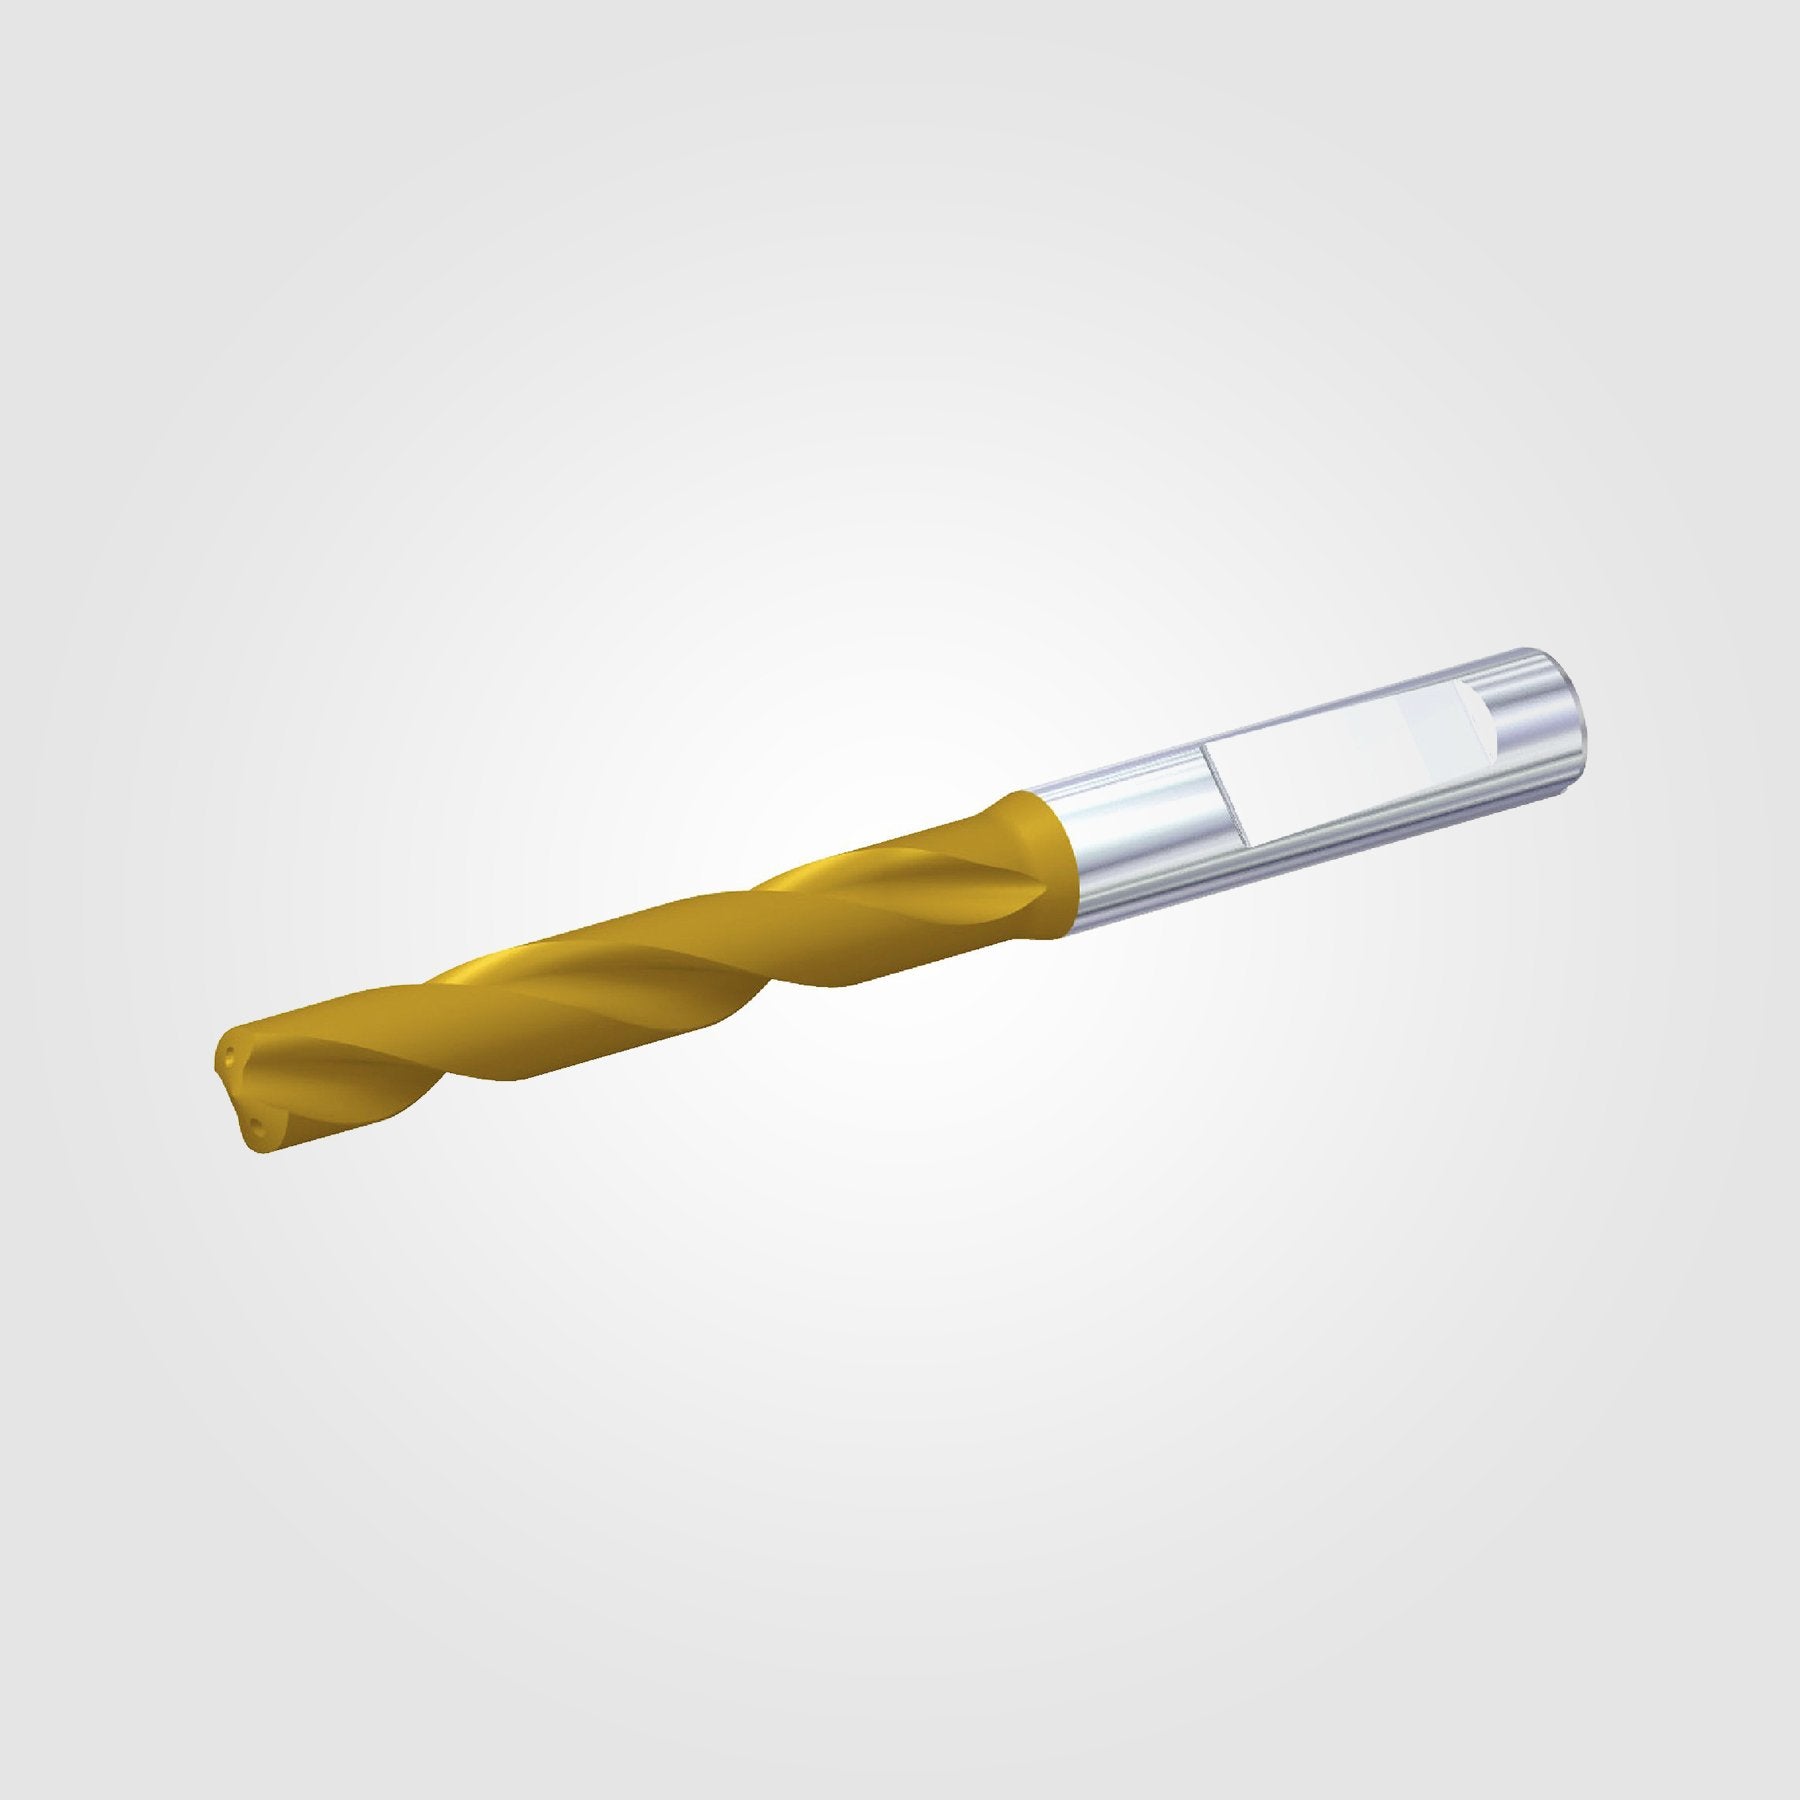 GOdrill (THROUGH COOLANT) | 7.1mm / .2795" / 3xD | SOLID CARBIDE DRILL | 4148950